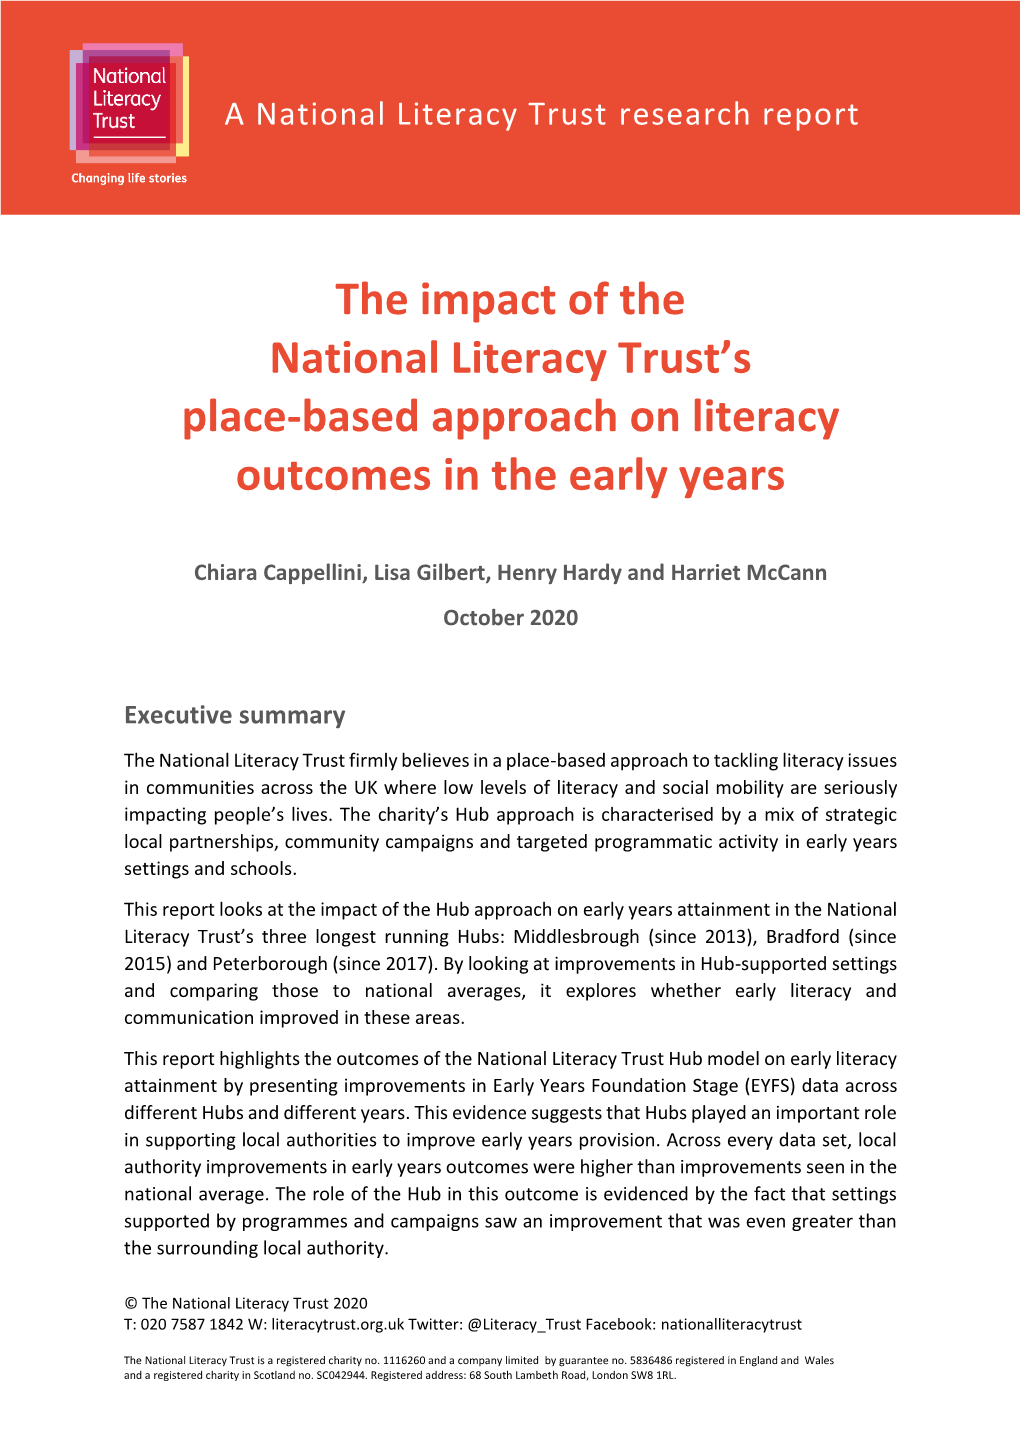 The Impact of the National Literacy Trust's Place-Based Approach On